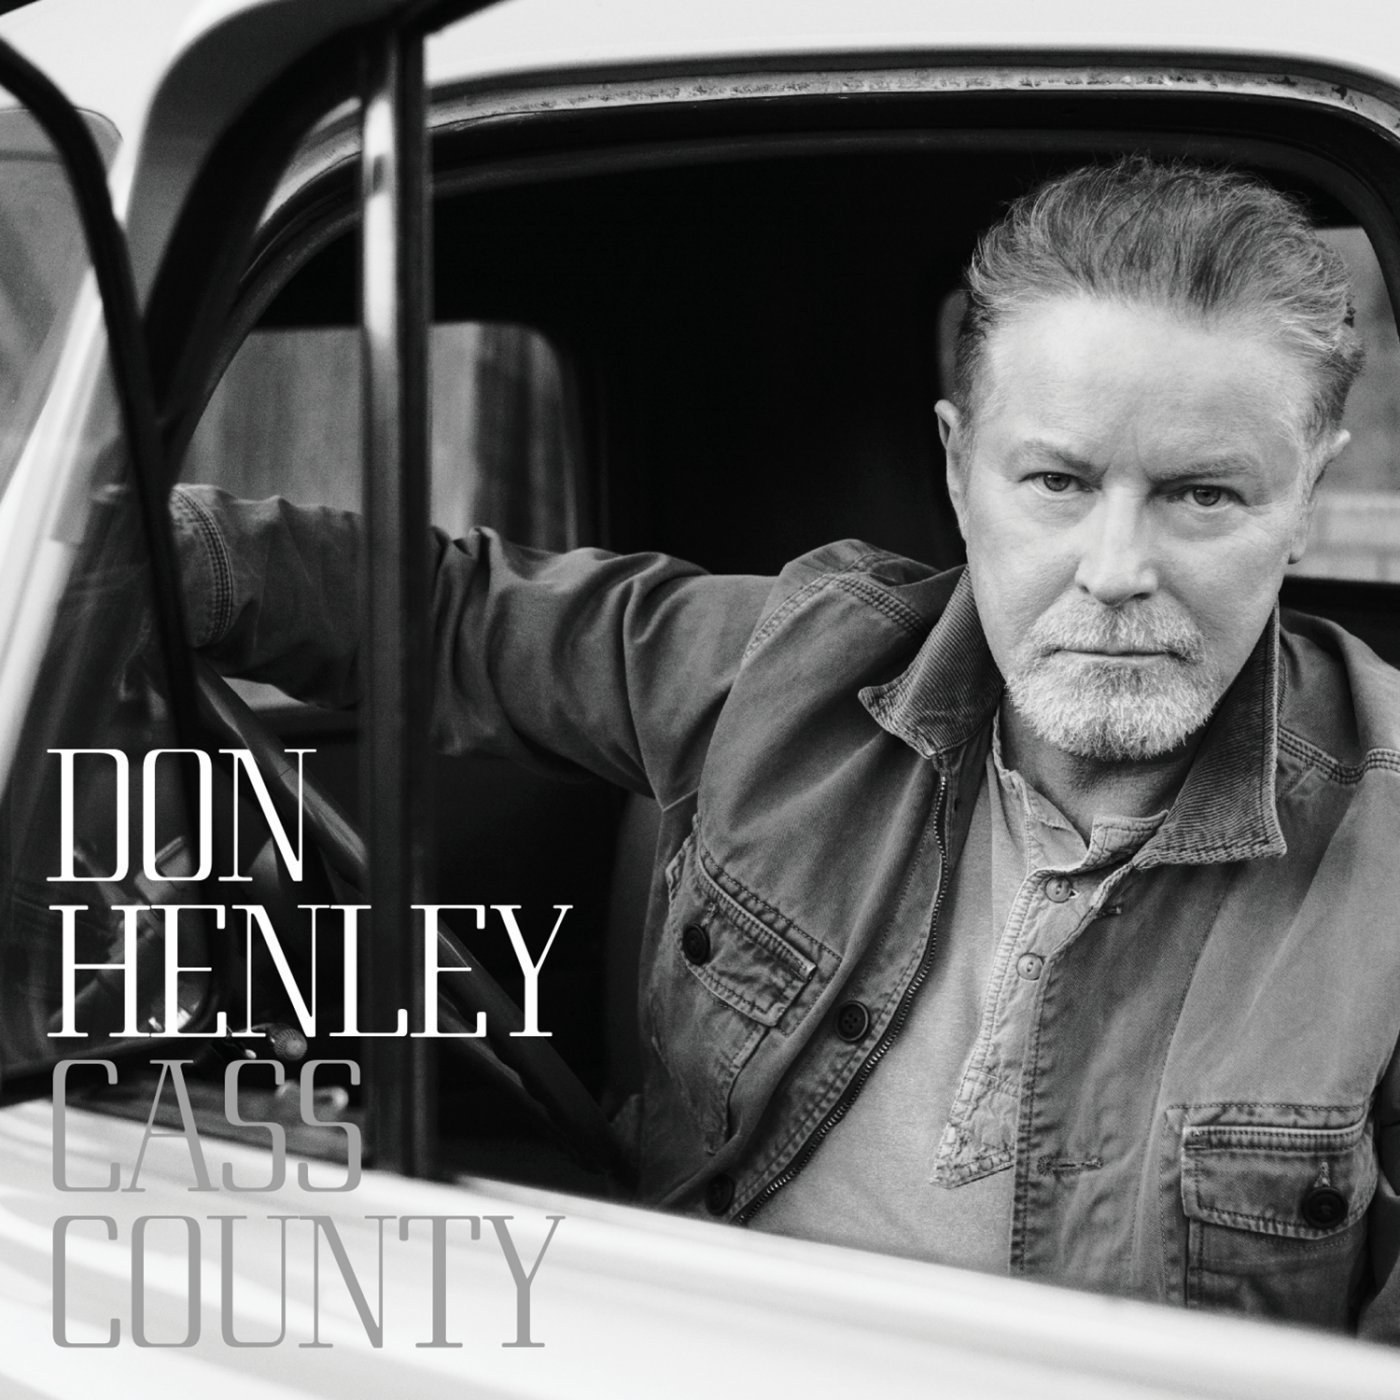 Don Henley - Cass County (2015) FLAC Download